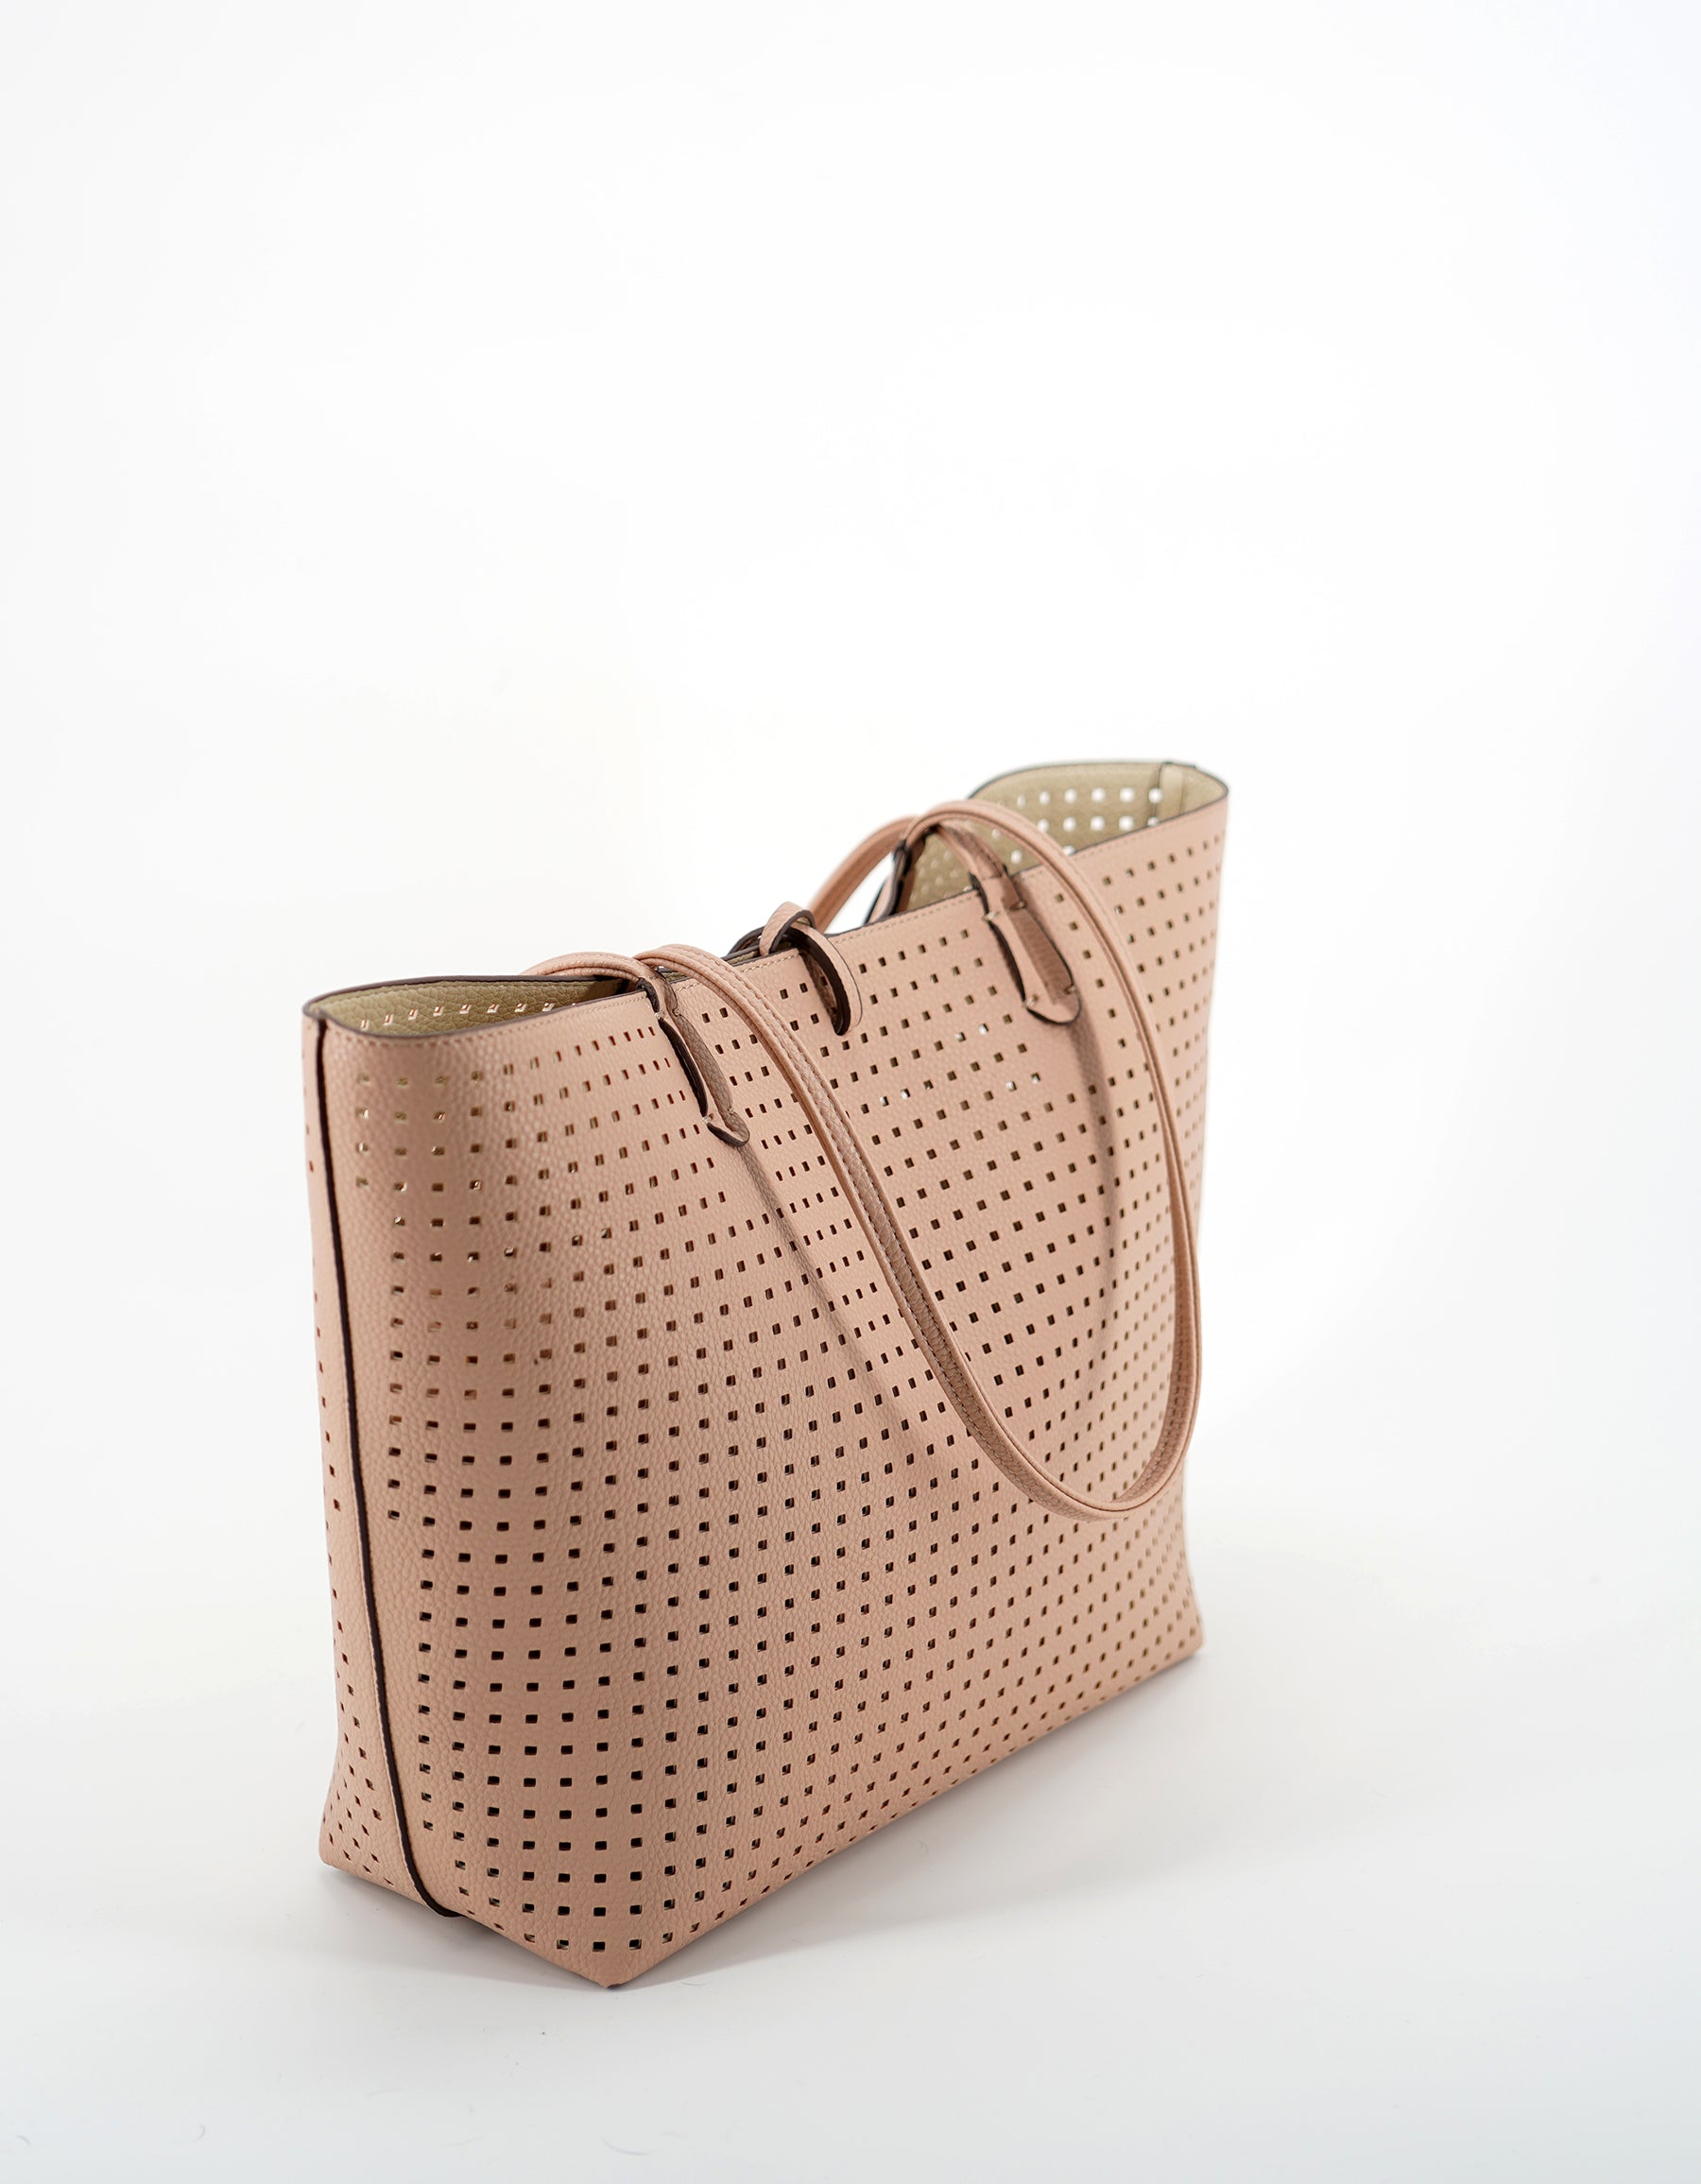 DEPARTURE TOTE PERFORATED SQUARE BALLET PINK/CREAM